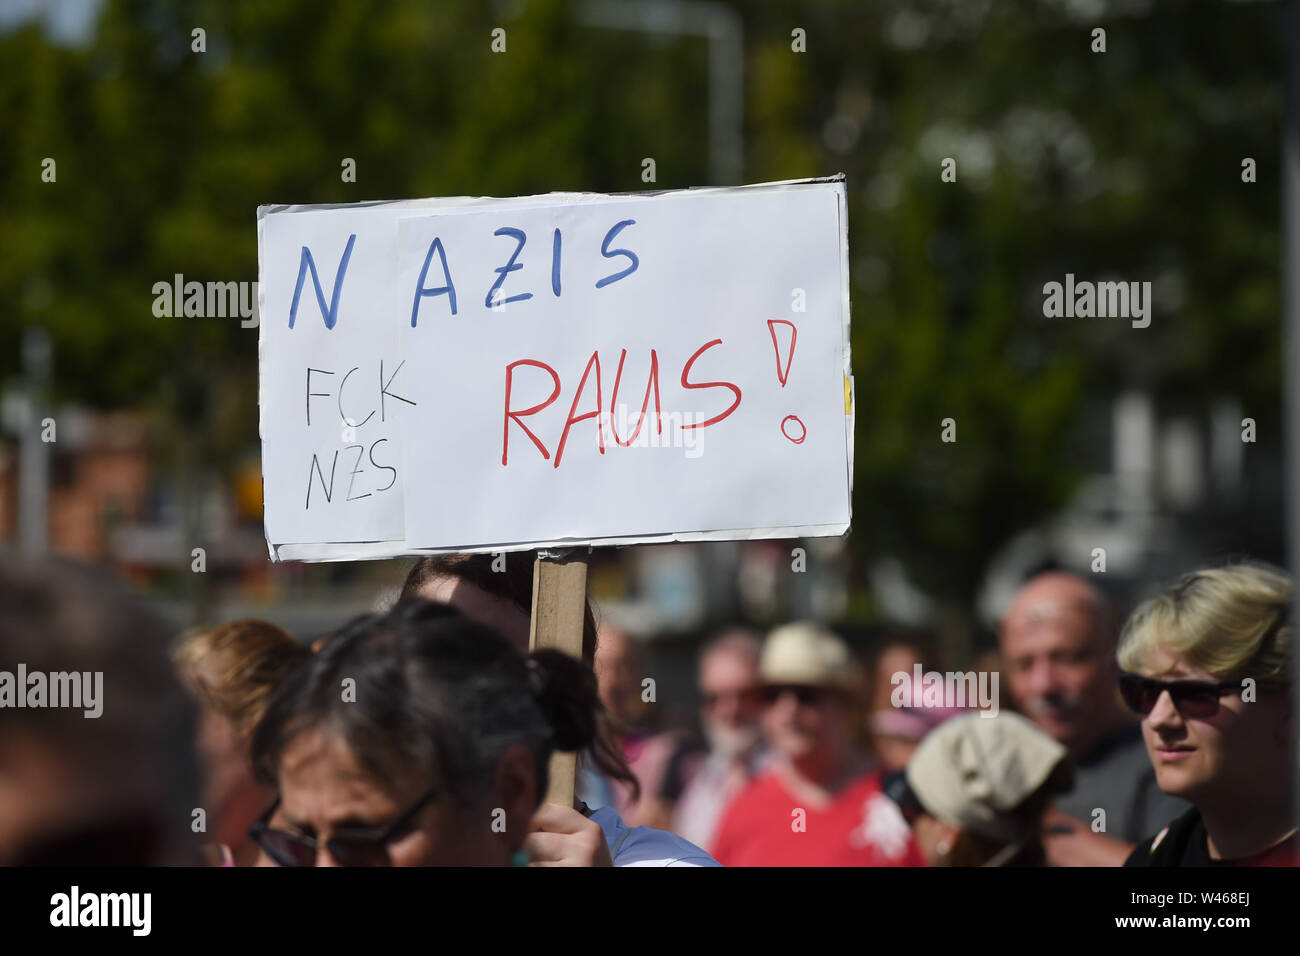 Kassel, Germany. 20th July, 2019. Thousands demonstrate against the march of the smallest party 'The Right'. The party had called for a demonstration in Kassel against media prejudgement in connection with the Lübcke case. A massive police presence is to prevent possible riots between the two camps. The poster says 'Nazis out.' Credit: Uwe Zucchi/dpa/Alamy Live News Stock Photo